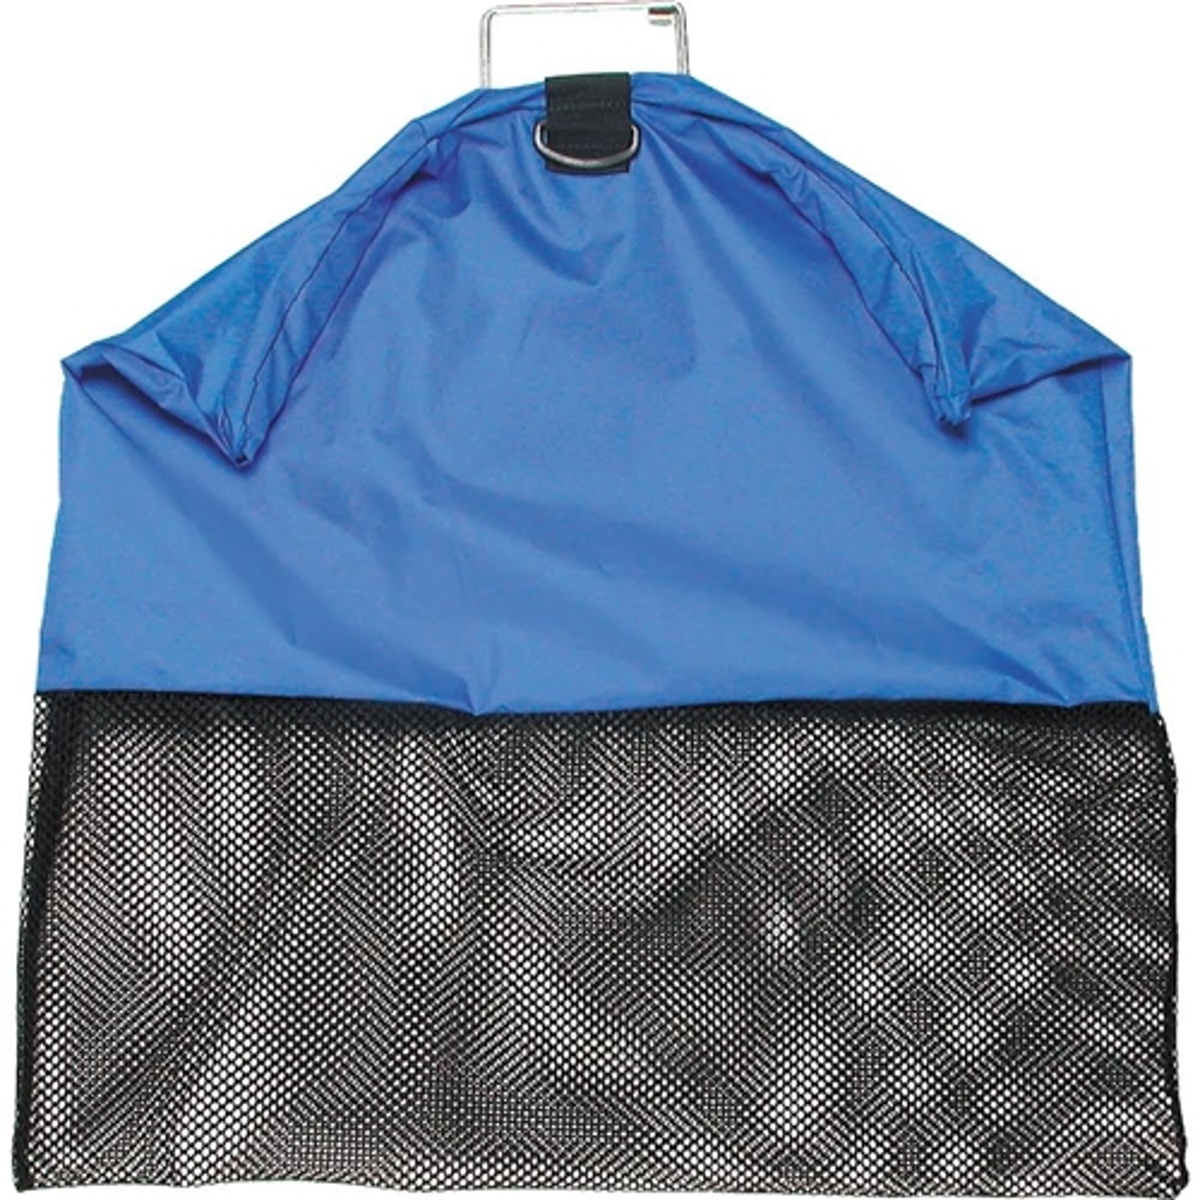 Innovative Deluxe Wire Handle Mesh Bag 24 in. x 30 in.